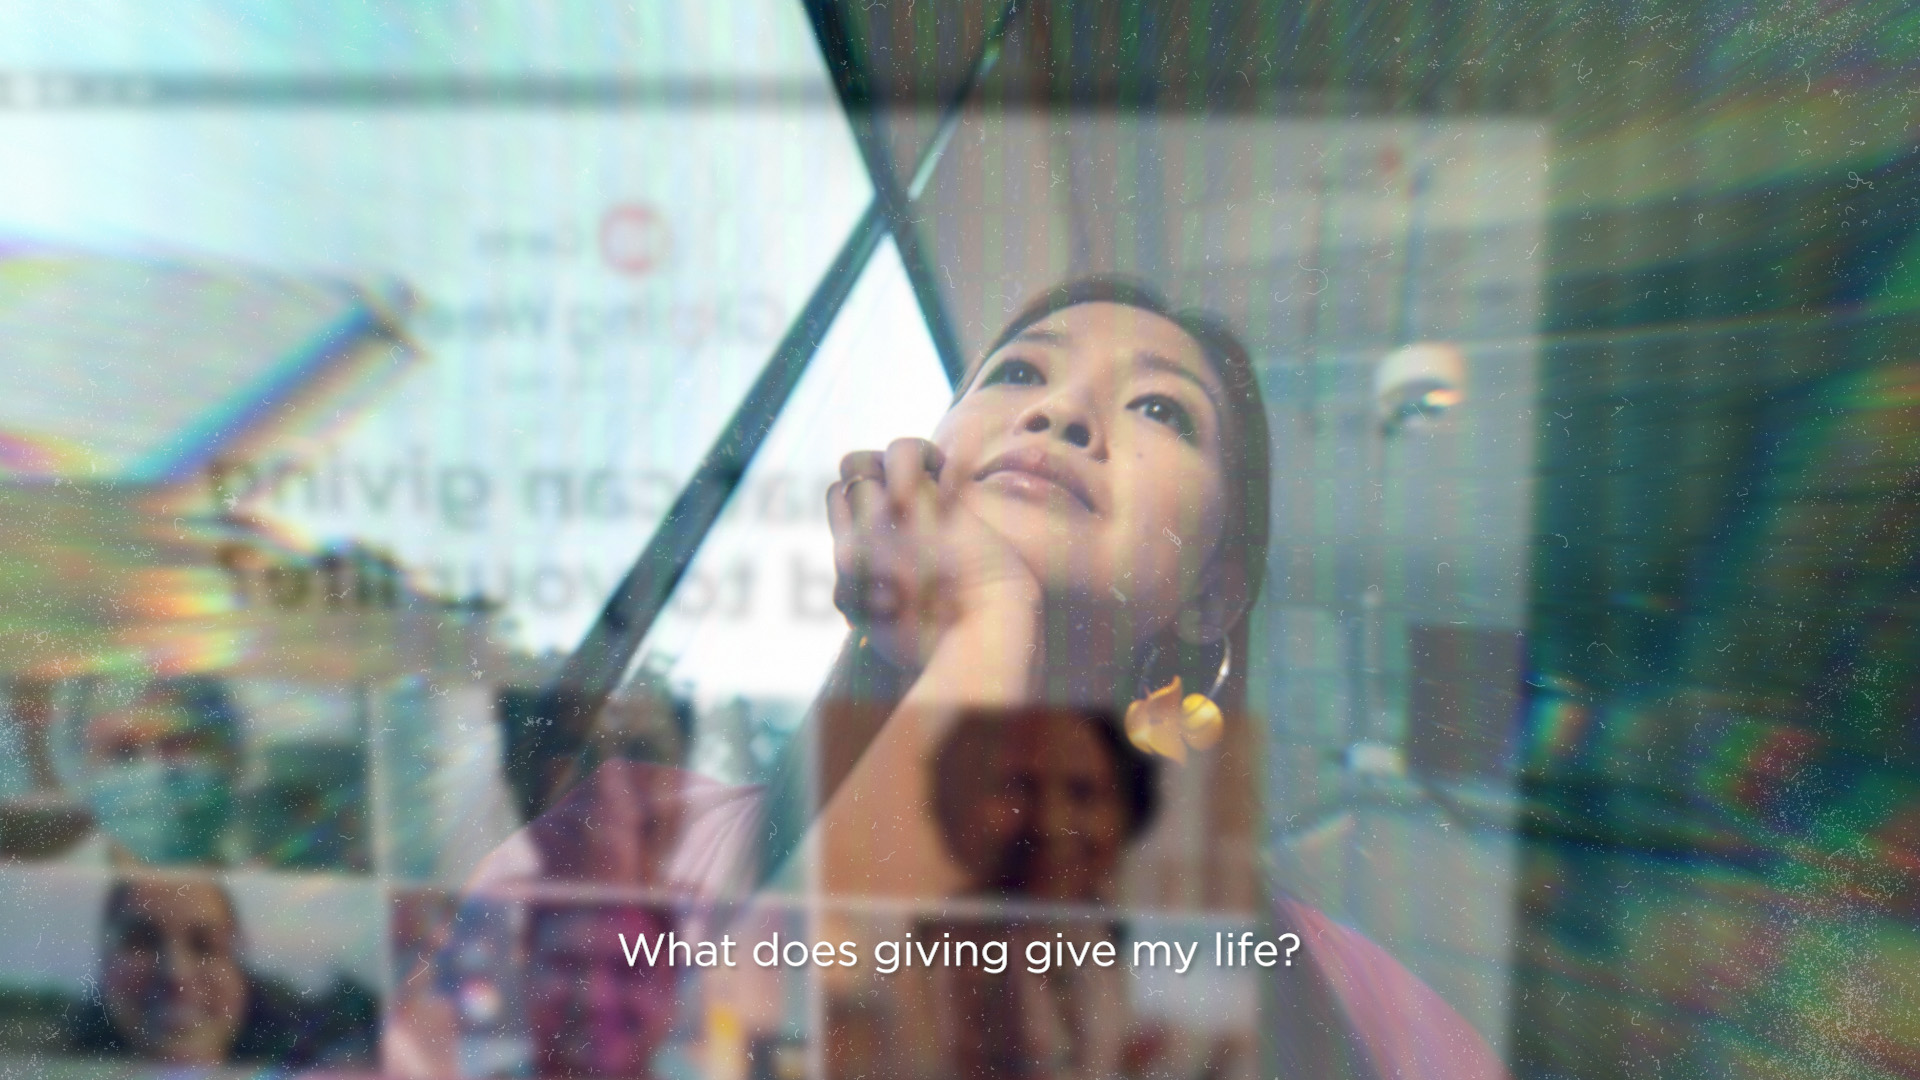 NVPC_Giving-gives-life-tvc-02